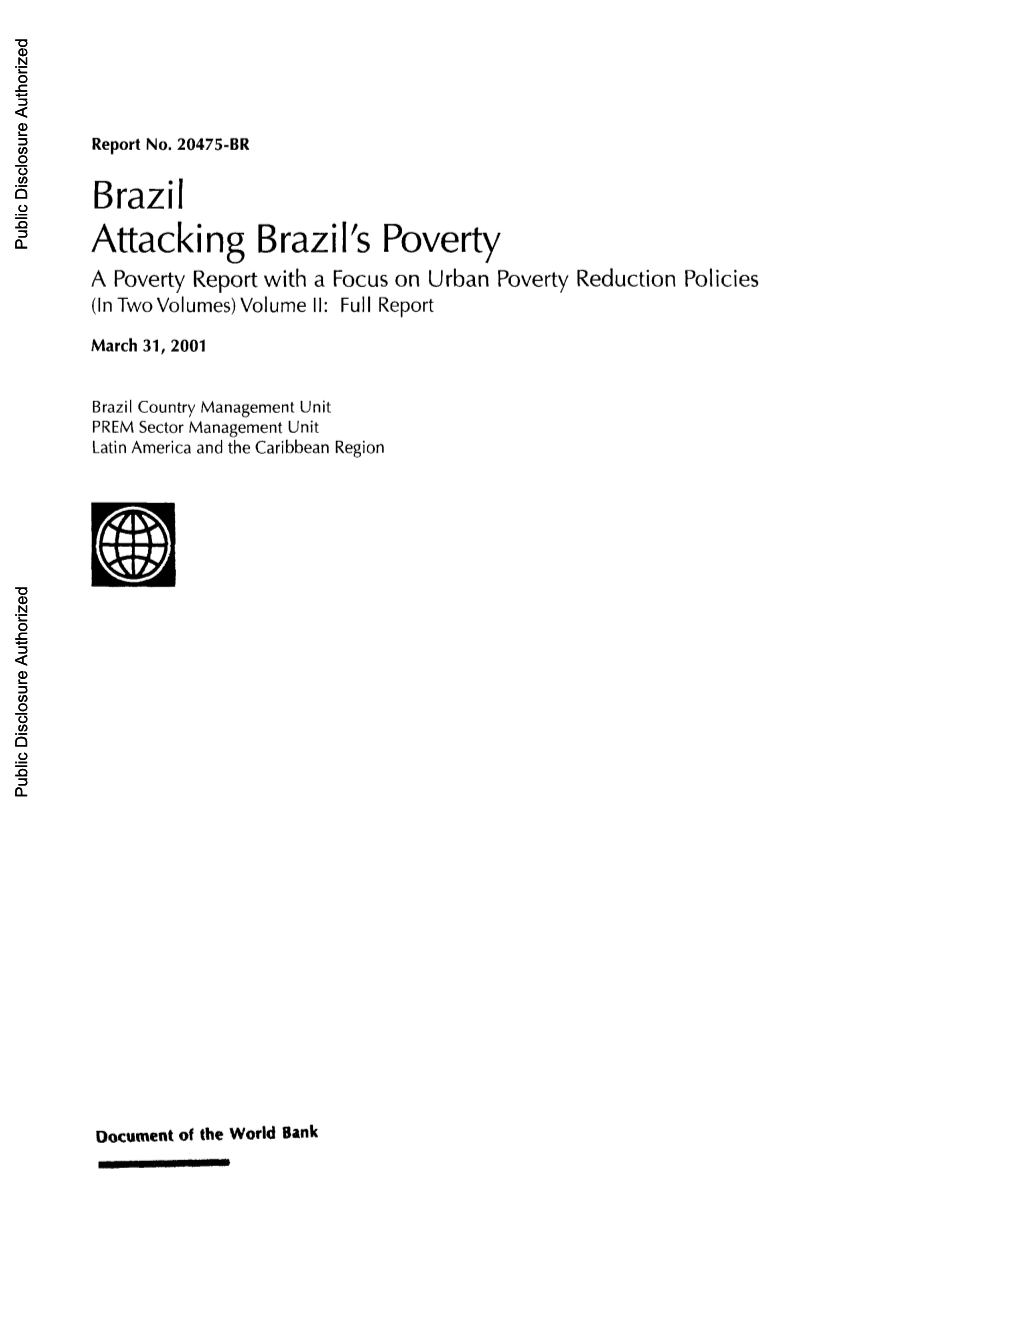 Attacking Brazil's Poverty a Poverty Report with a Focus on Urban Poverty Reduction Policies